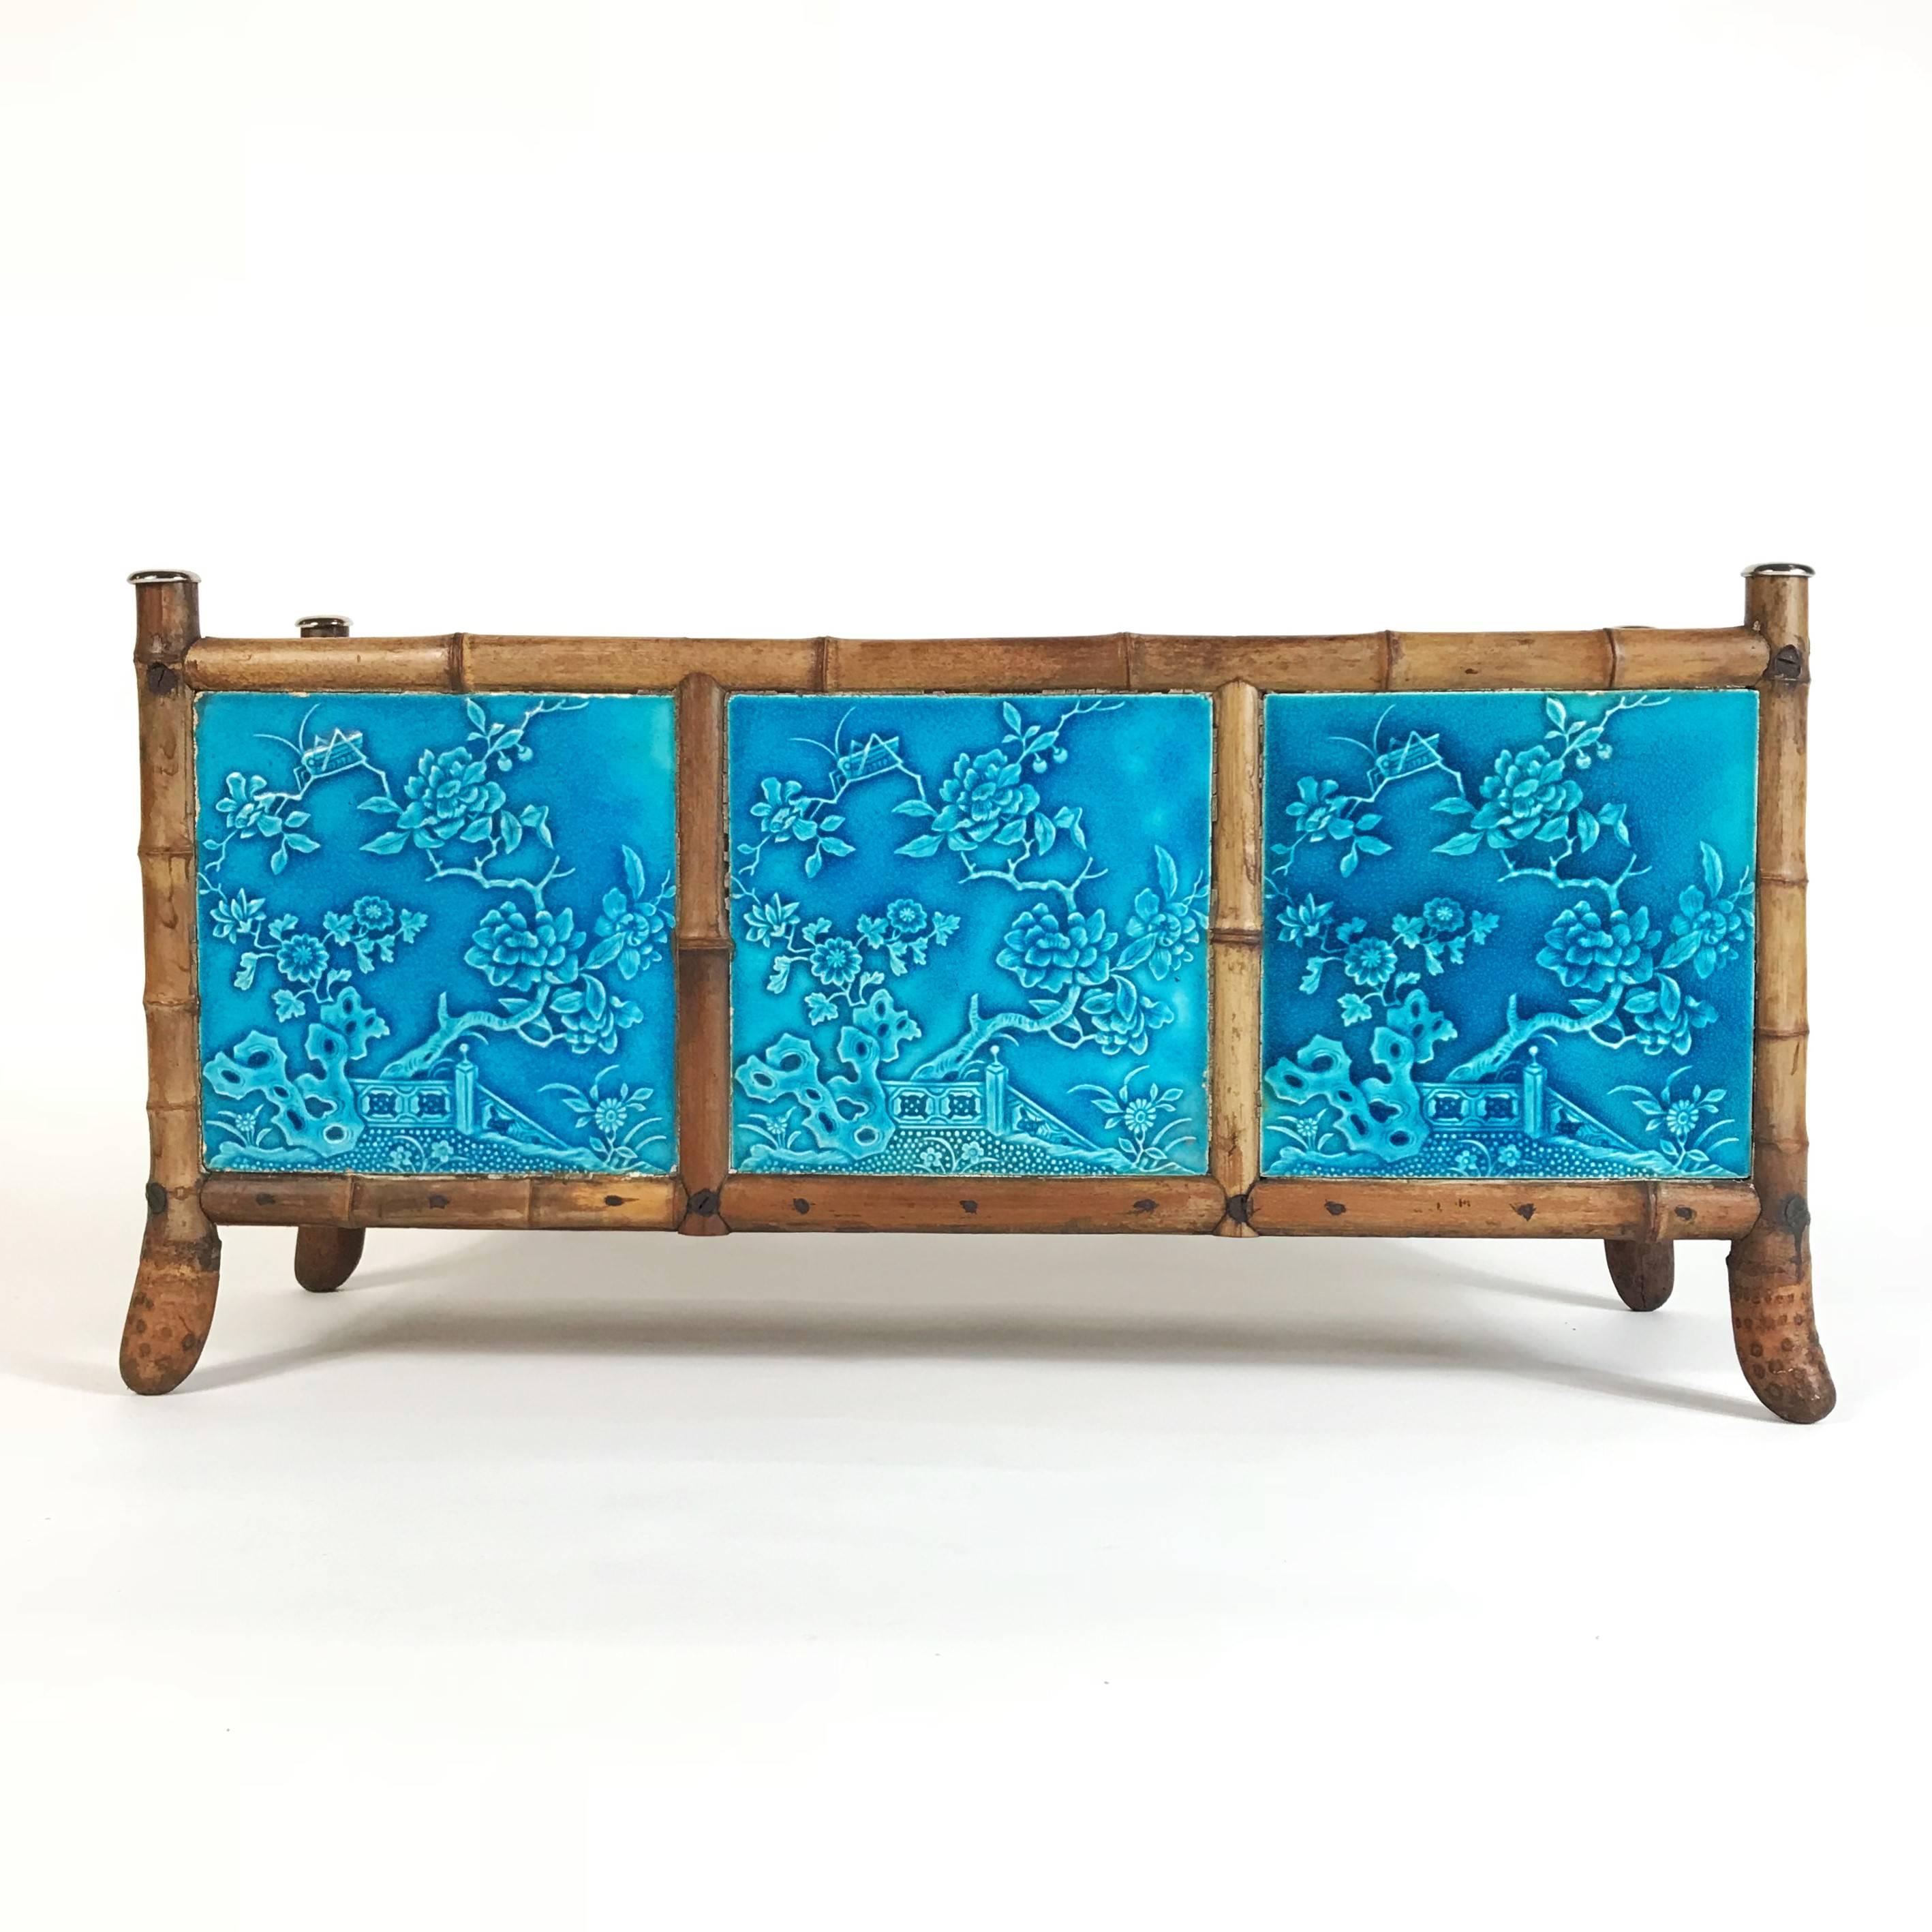 Unique Art Nouveau bamboo jardinière with three relief tiles incorporating japonais motifs by the manufacture Maw & Co. Benthall Works. The uniqueness of this planter is based on the feet made from bamboo roots. I found this rare object at an